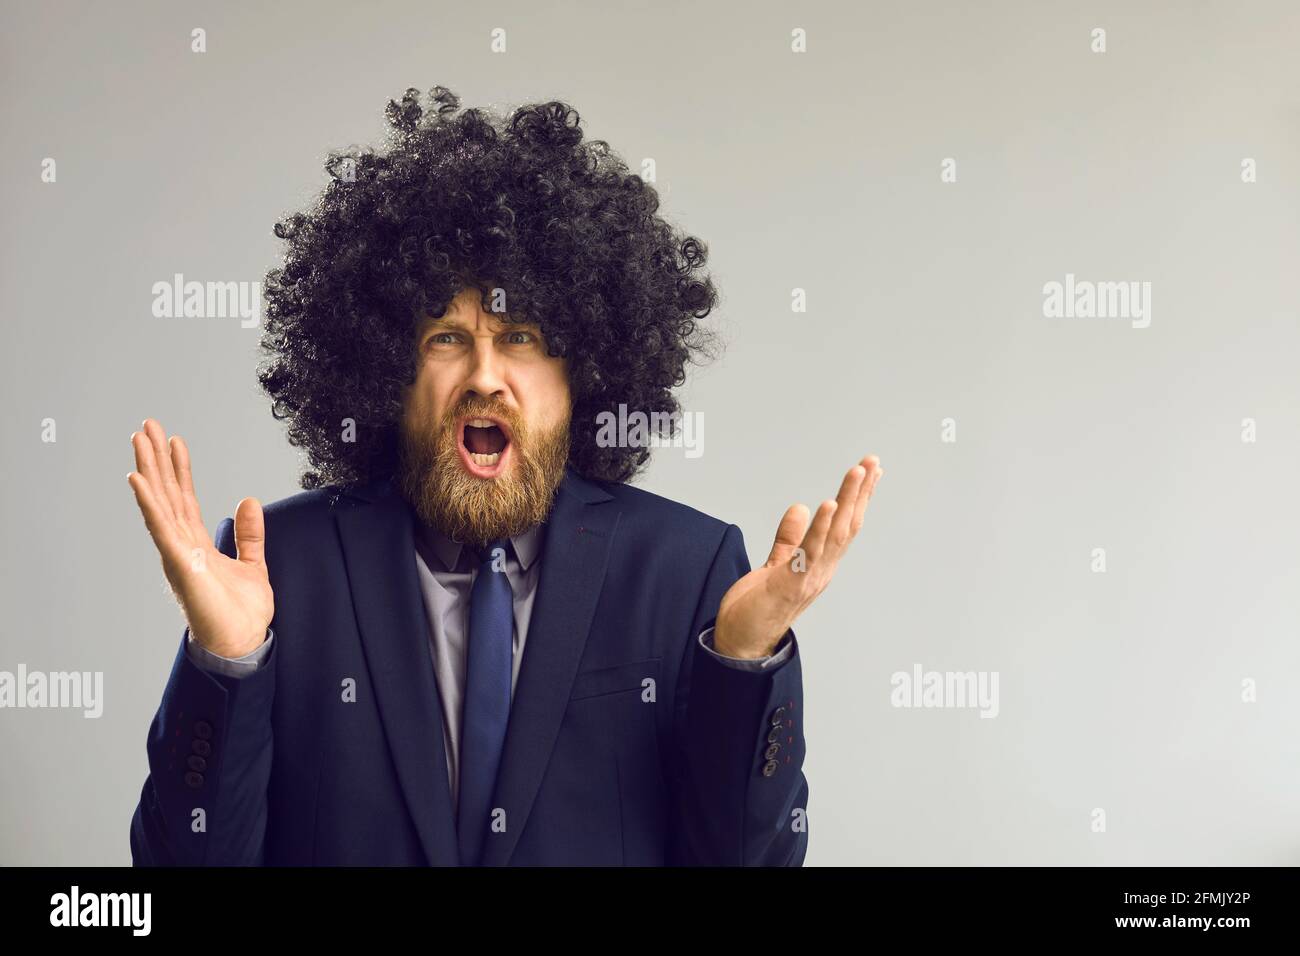 Funny man in afro hair wig angry shouting and gesturing at camera studio shot Stock Photo